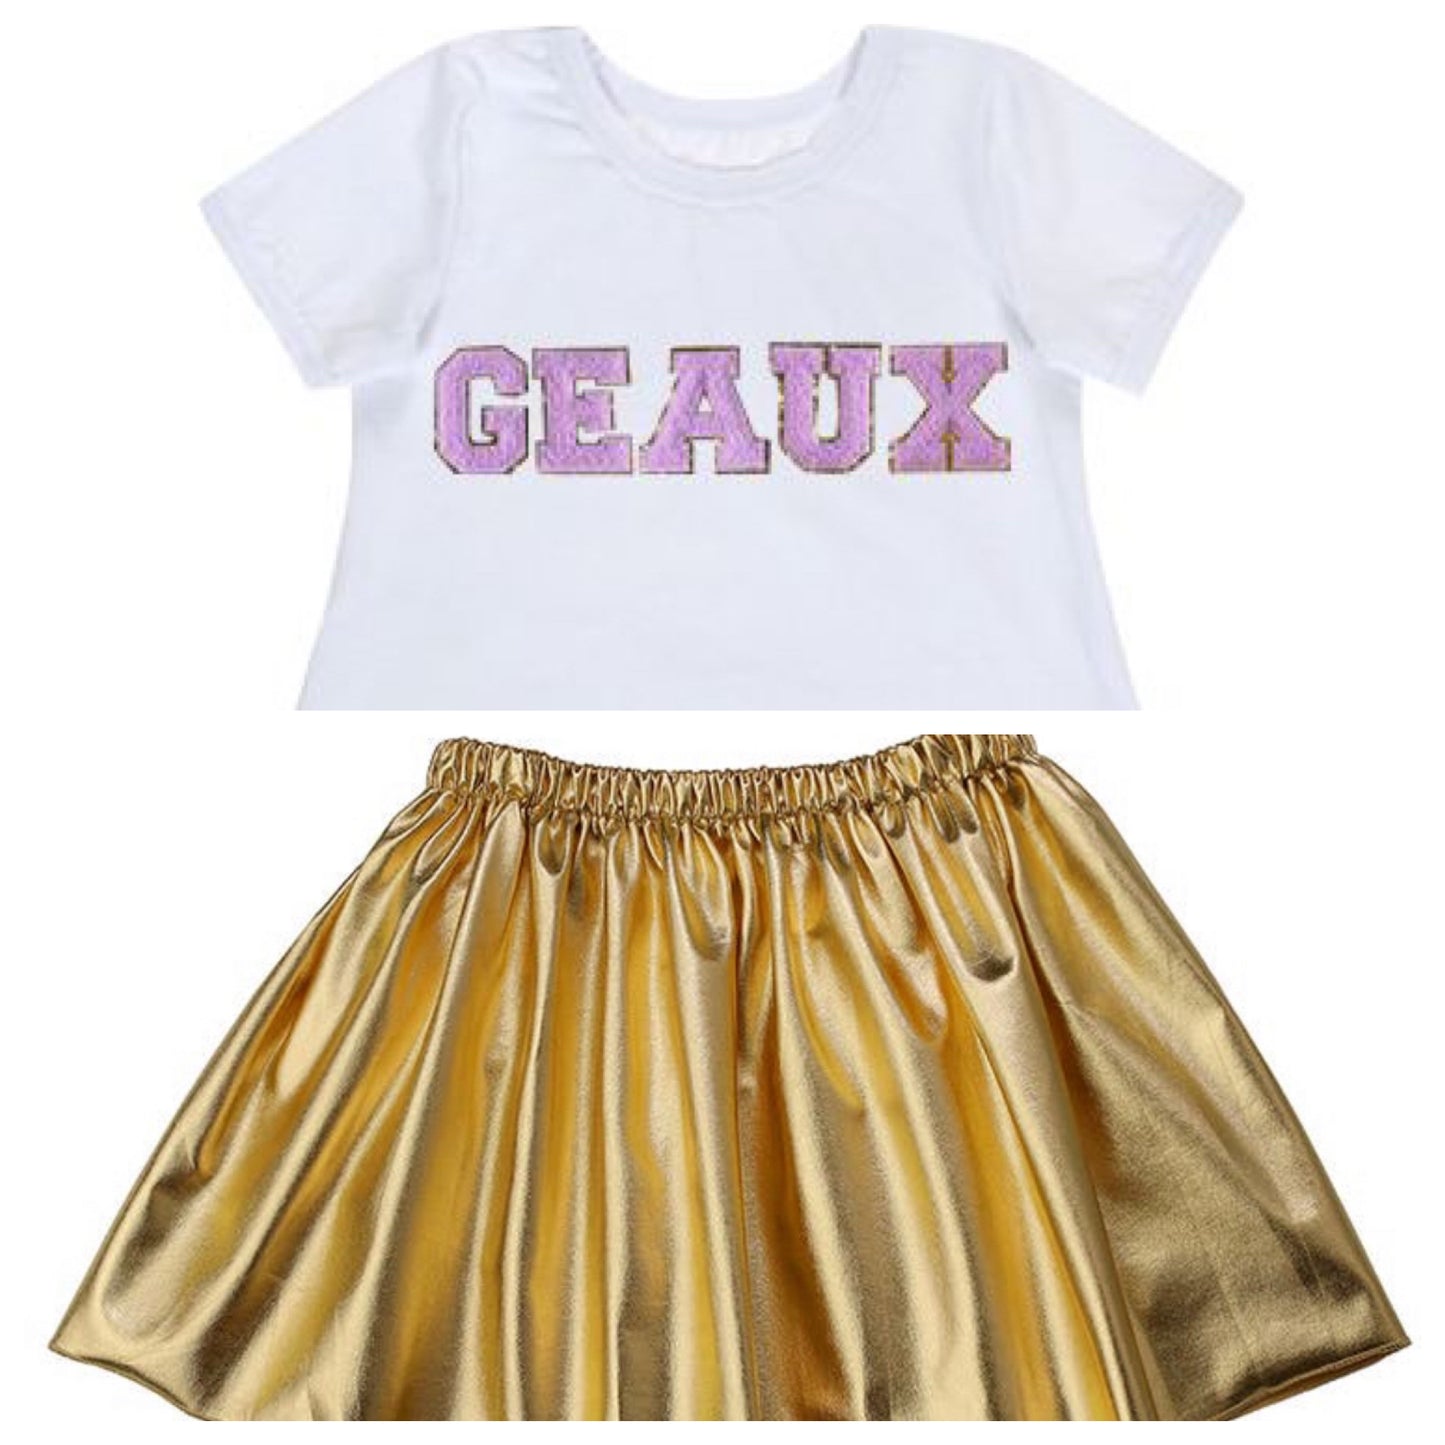 Girls GEAUX Chenille Patch tee shirt